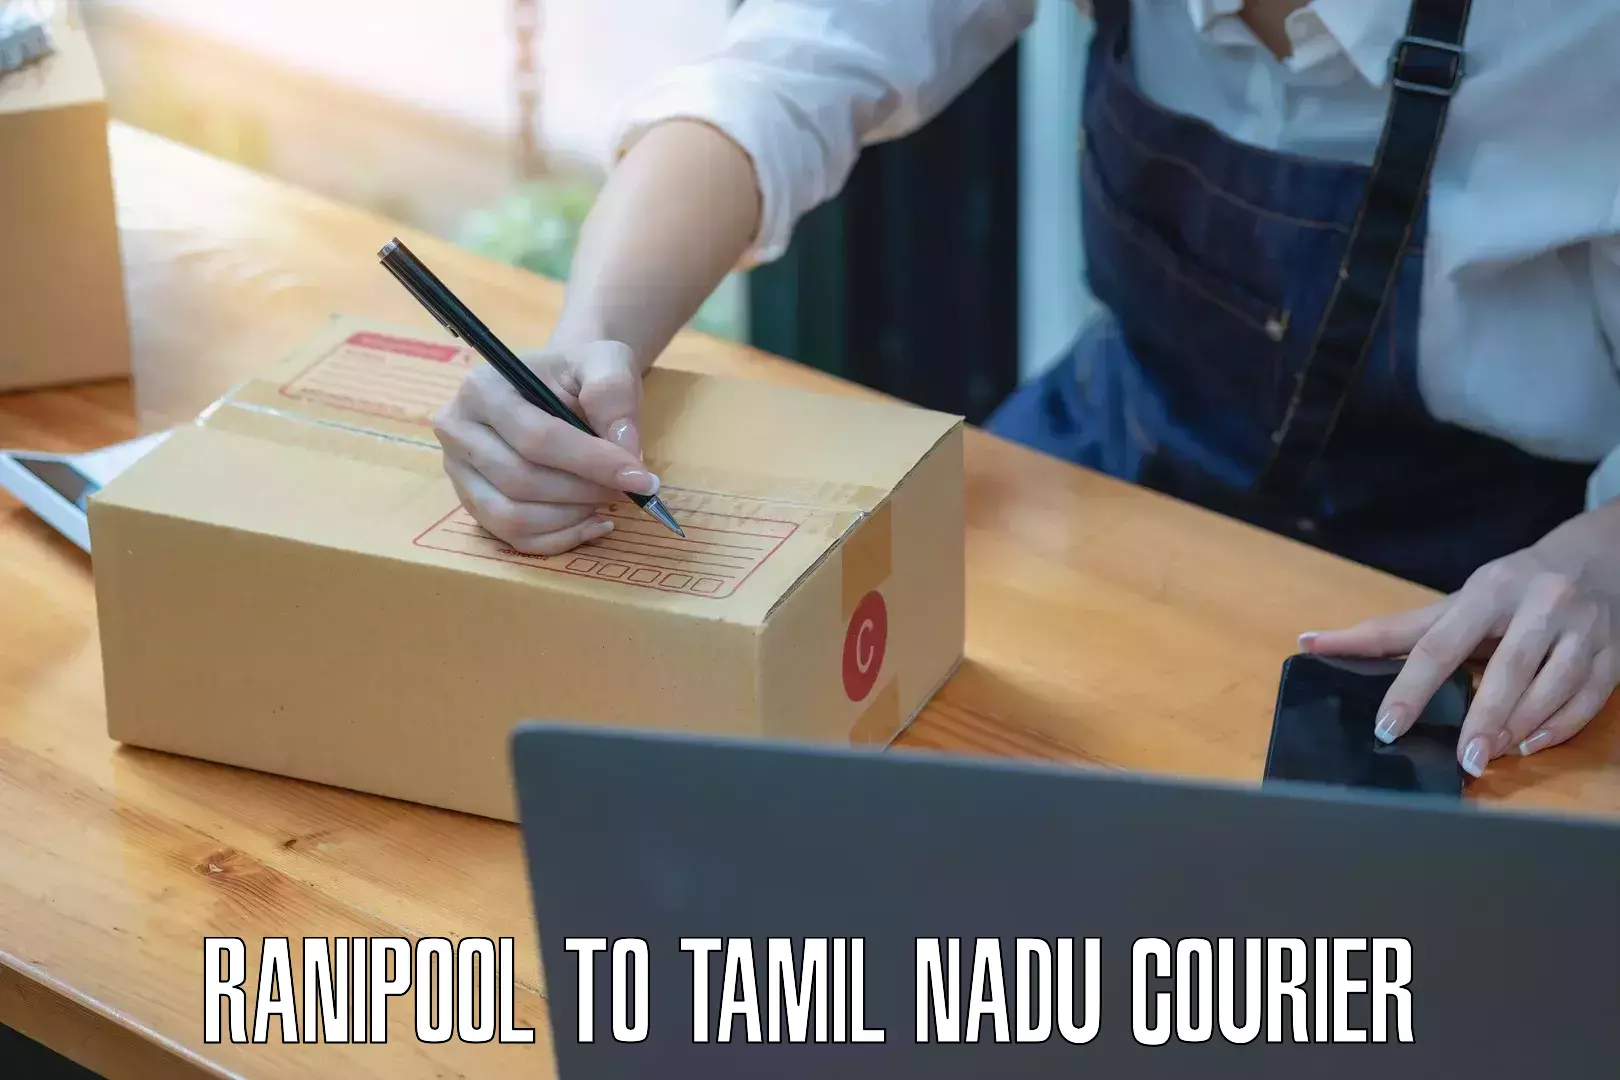 Premium courier solutions Ranipool to Ennore Port Chennai